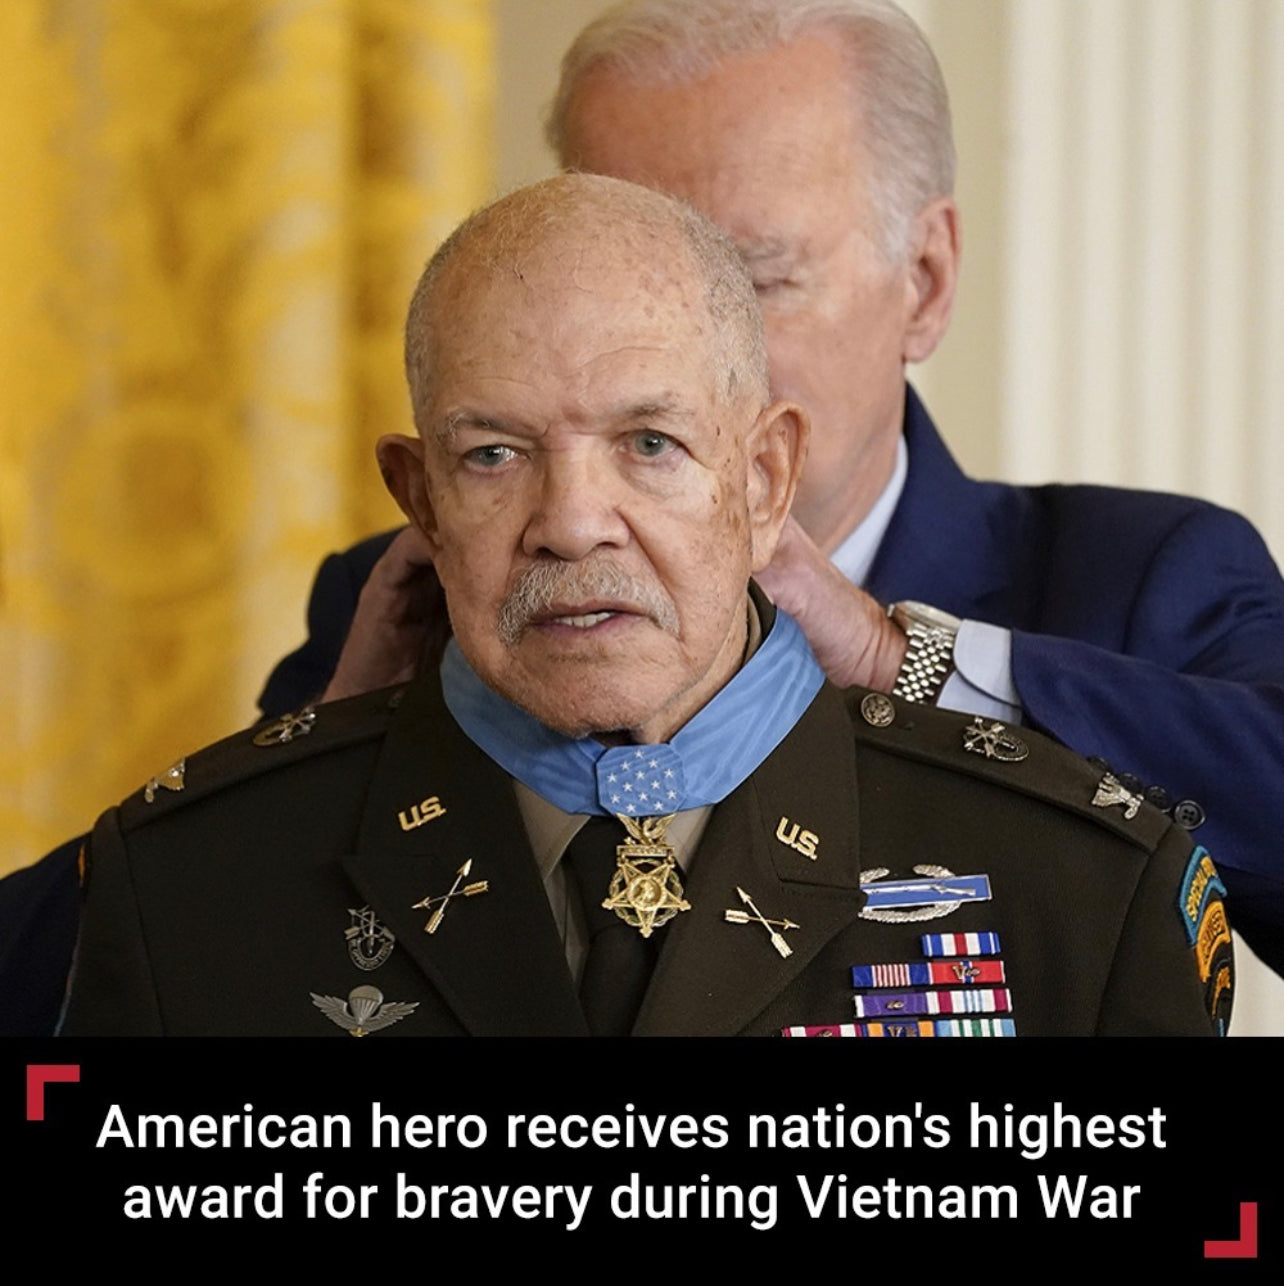 Paris Davis, one of the first Black SF Combat Officers, final receives Medal of Honor